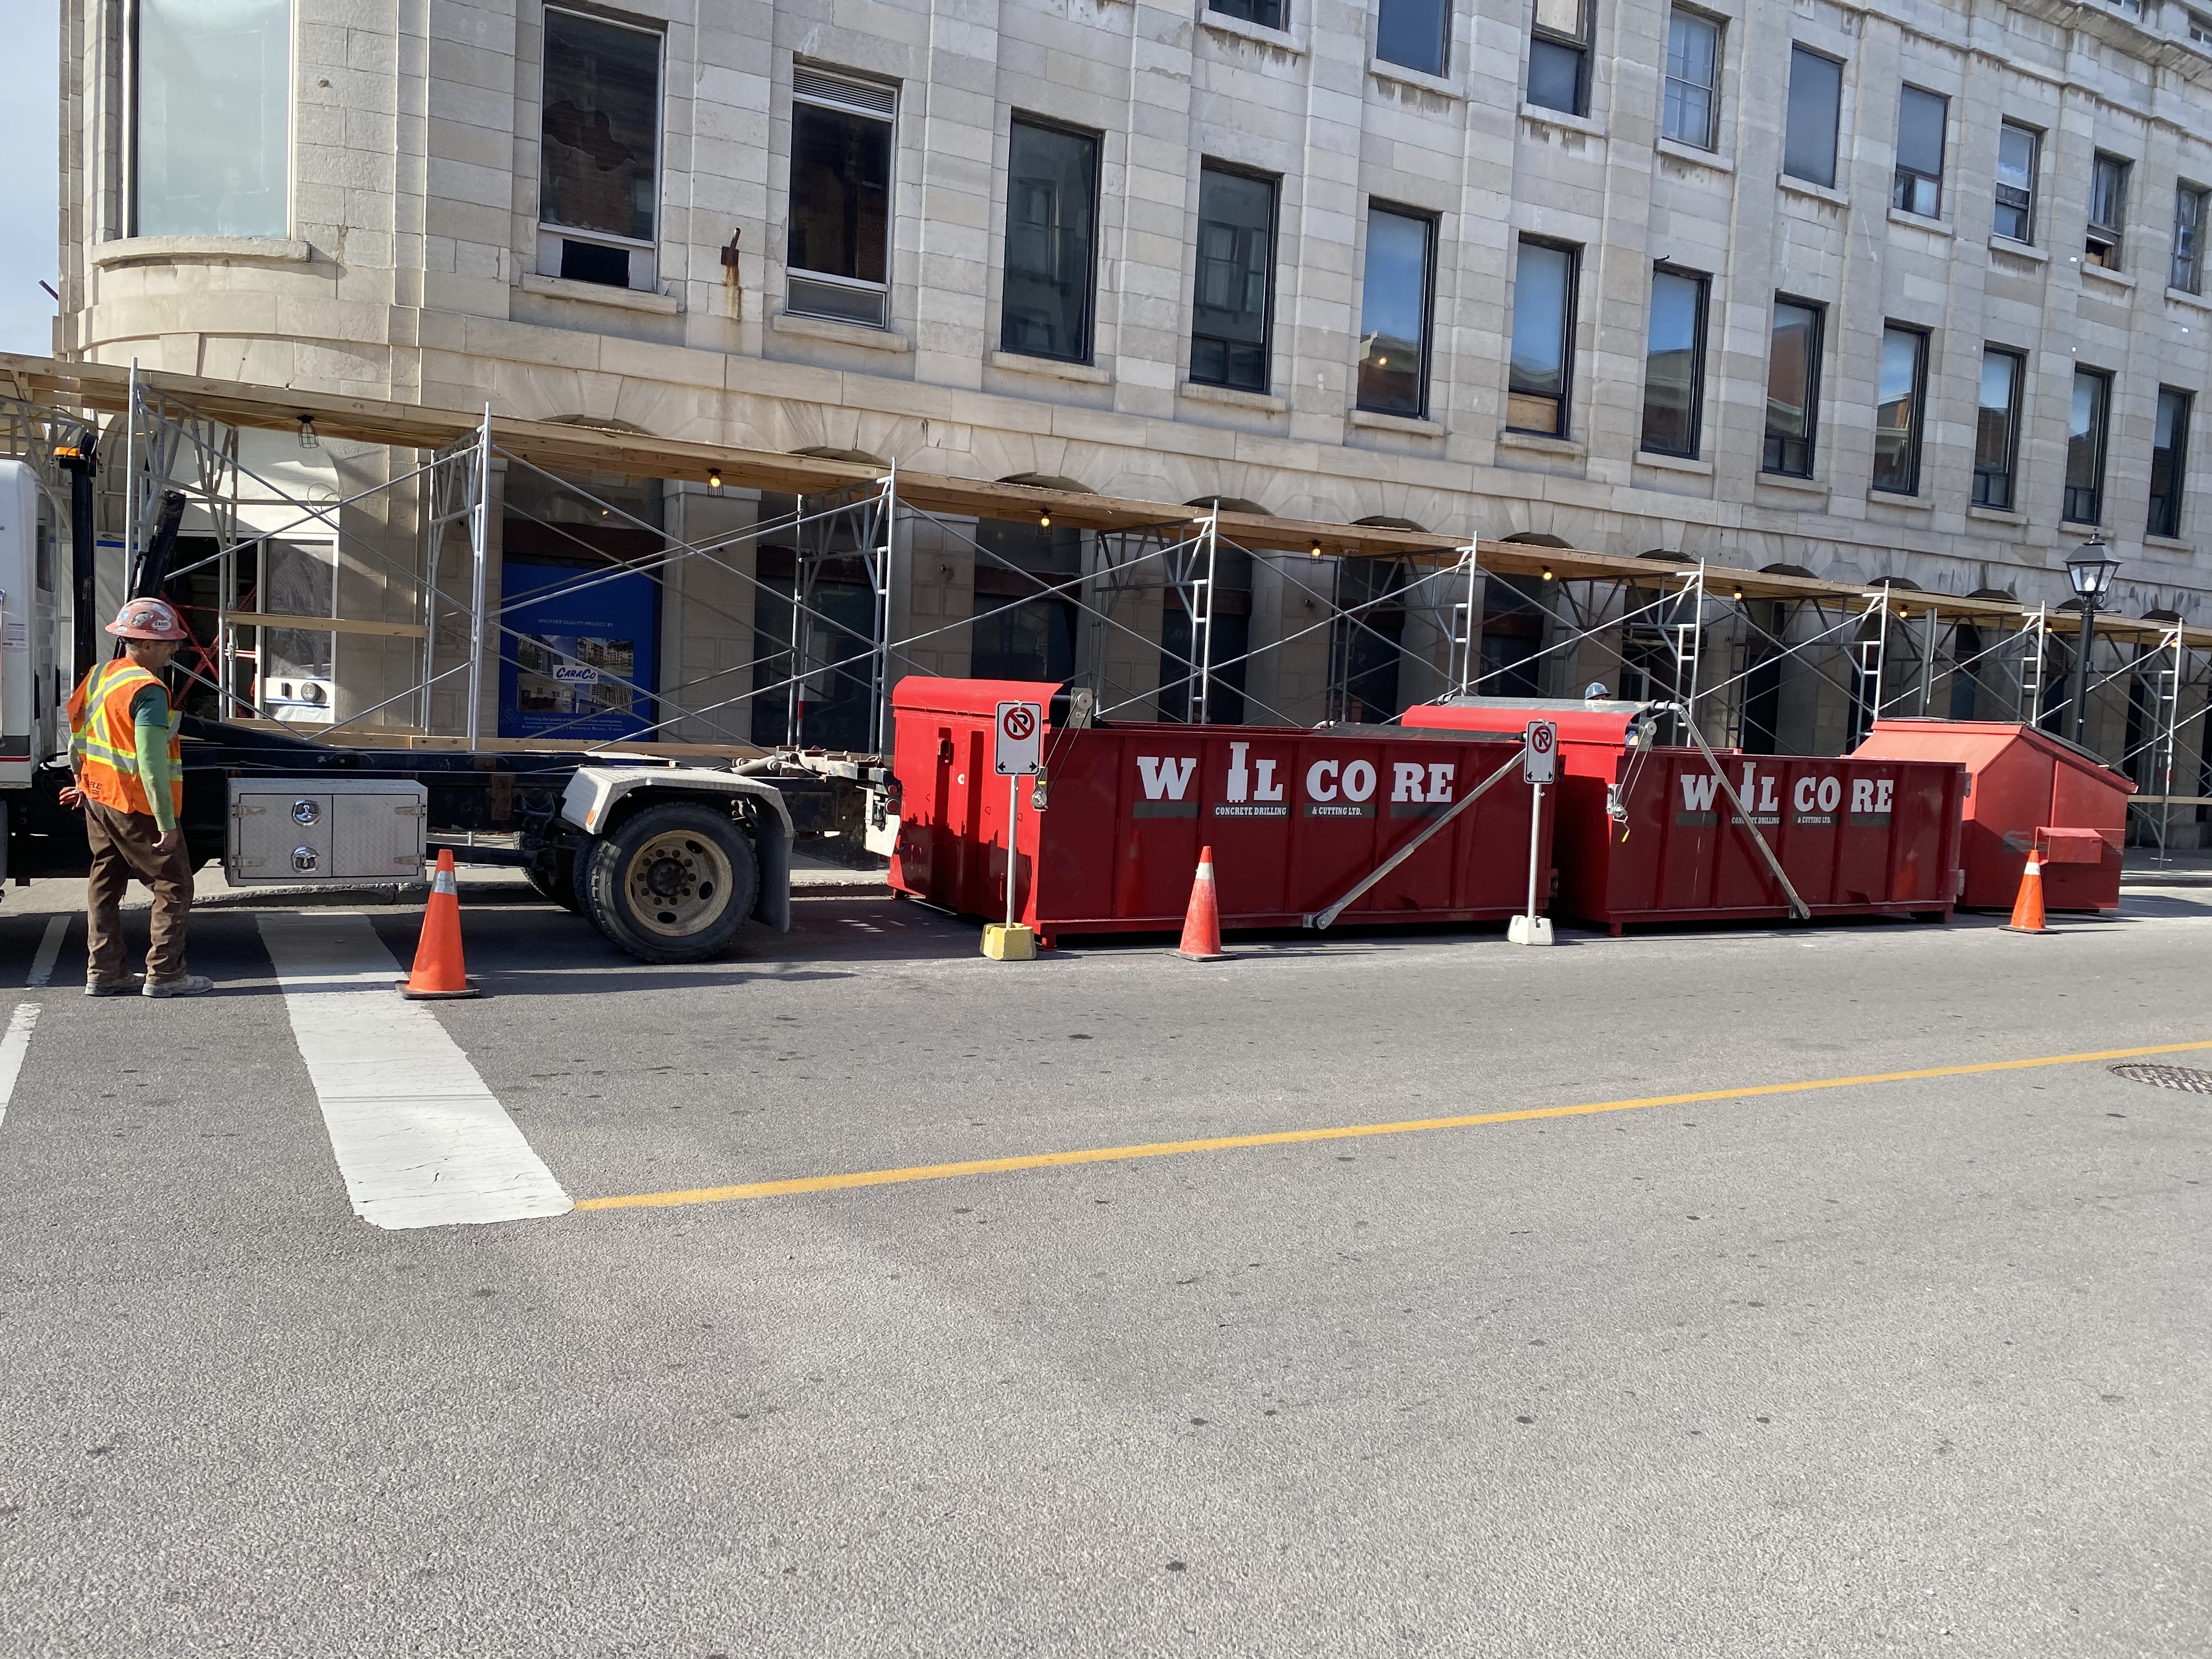 Photo of a Wilcore truck and Wilcore dumpsters in a downtown setting